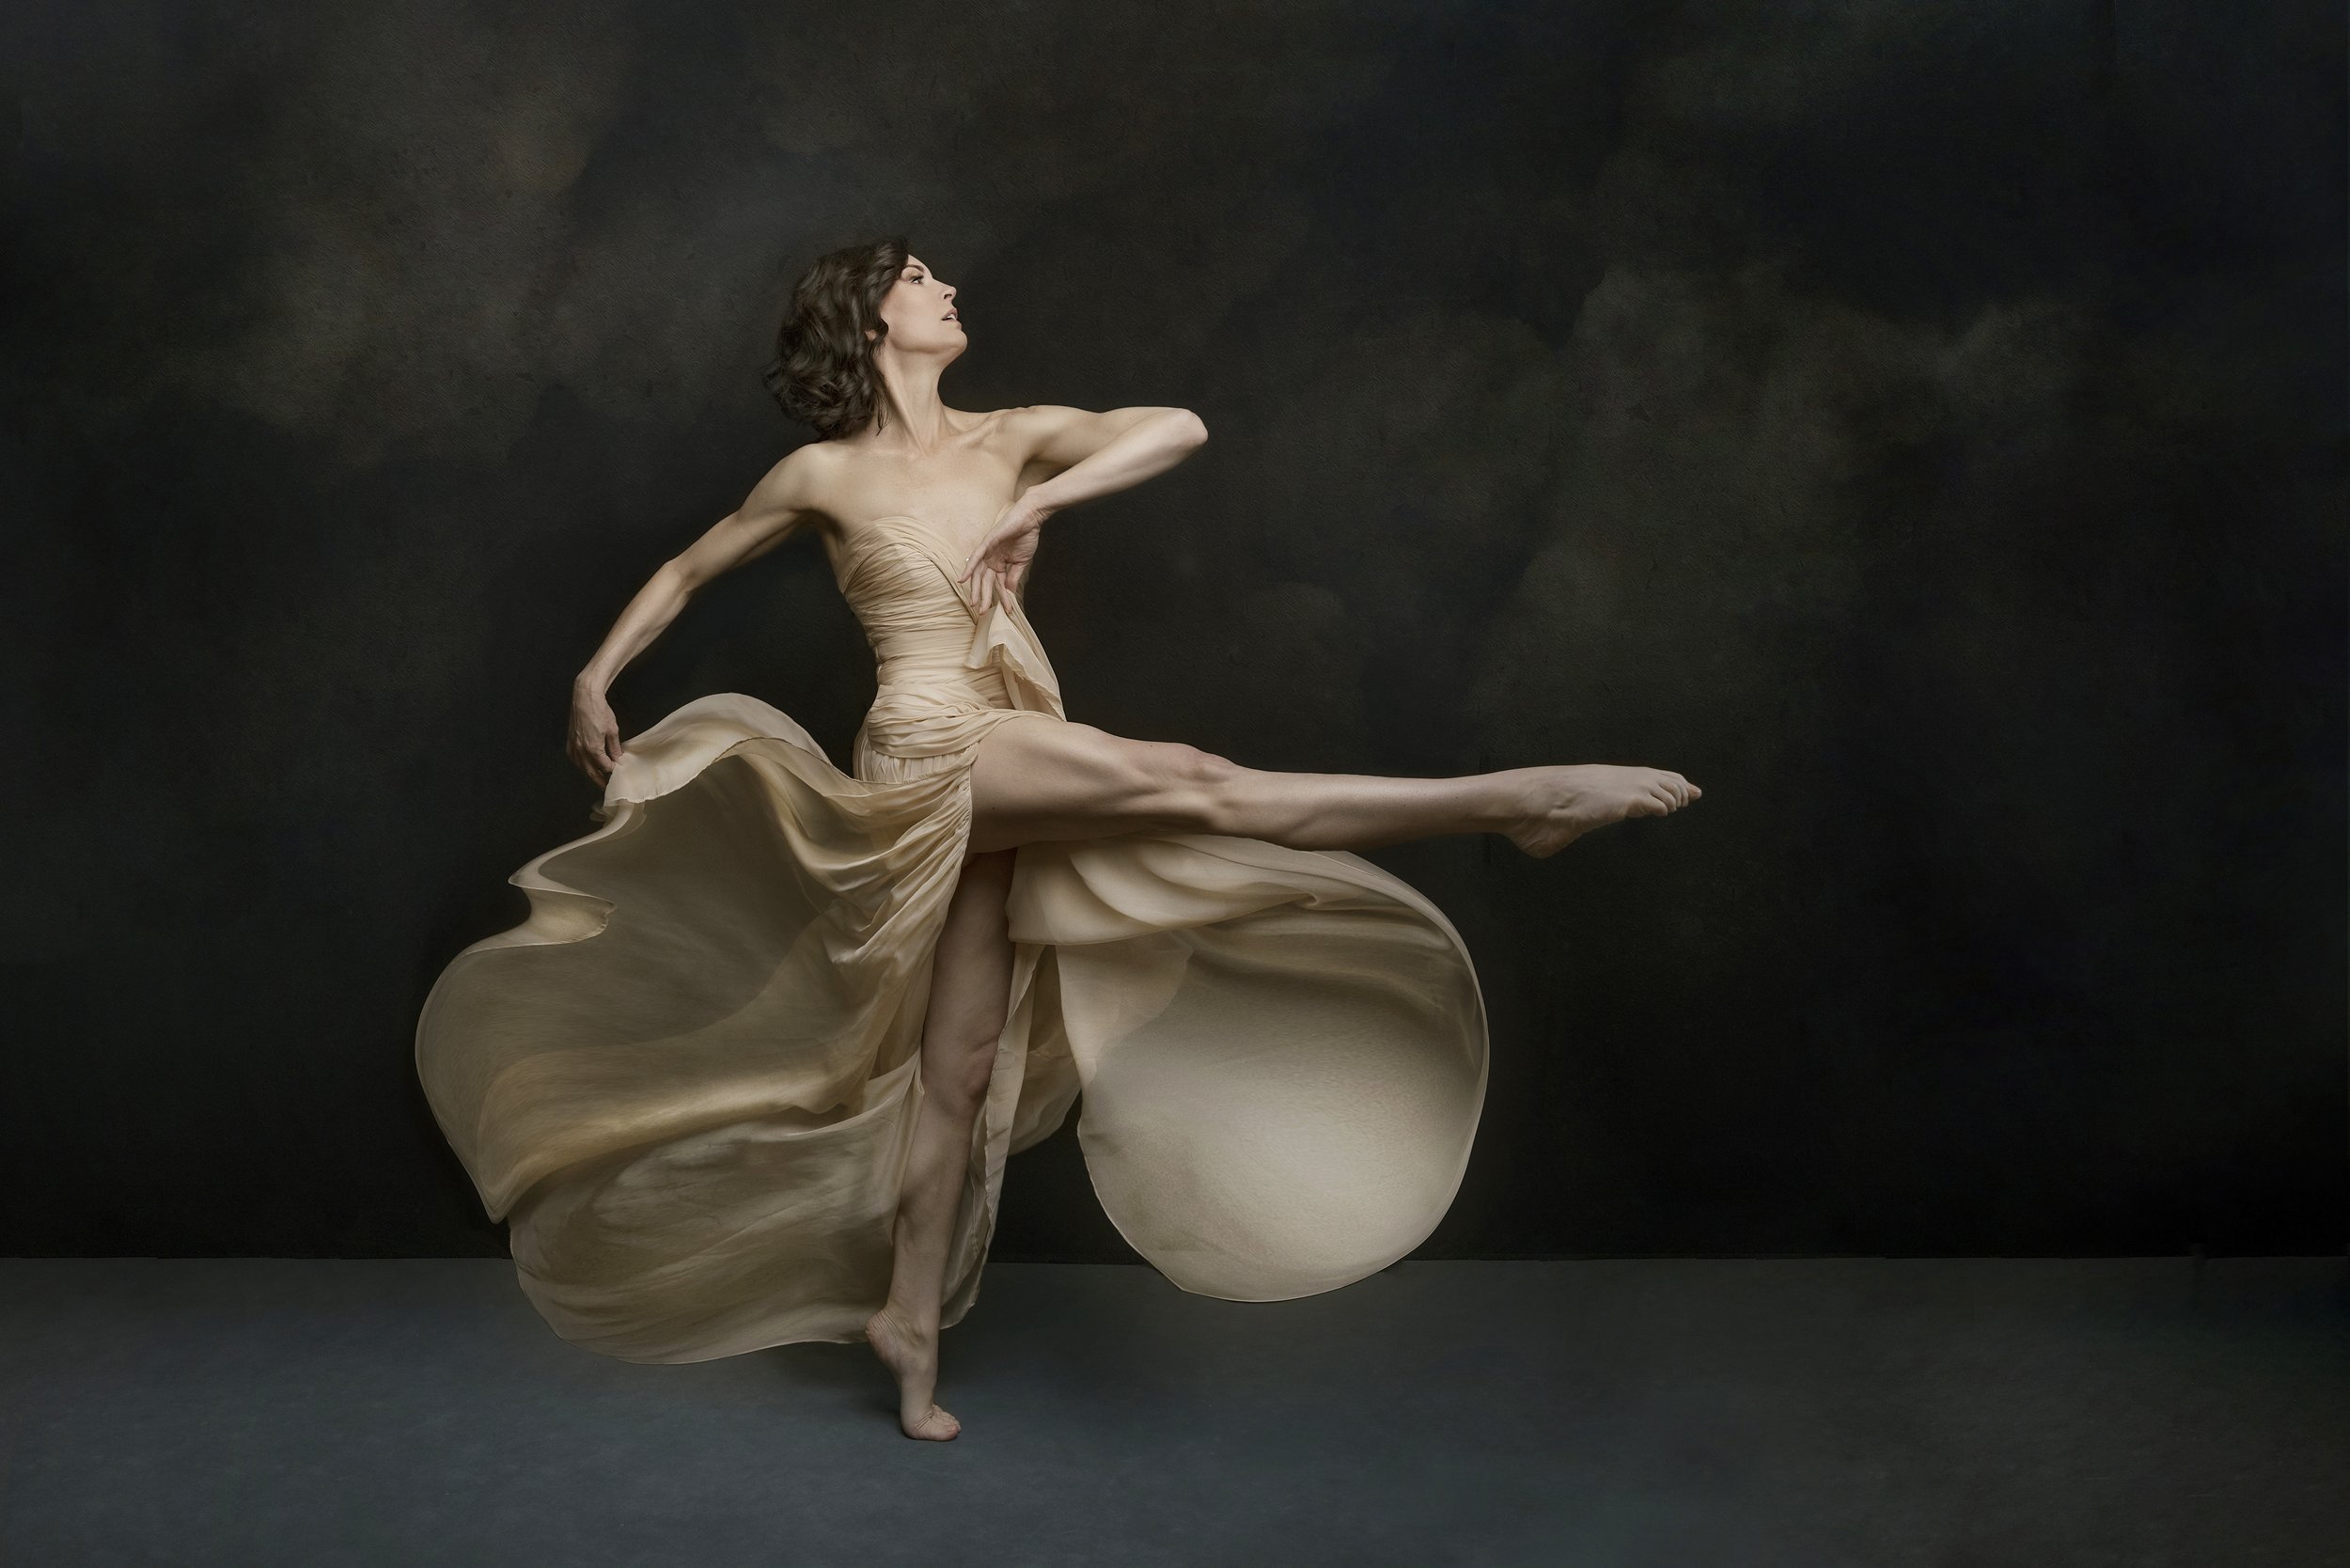  A Dance studio owner showing how it is done in beautiful gown dancing for modern fine art portrait.  This was taken as part of the worthy series for women’s portraits, women’s fine art nude and women’s modern portraits in Kirkland and Bellevue Washi